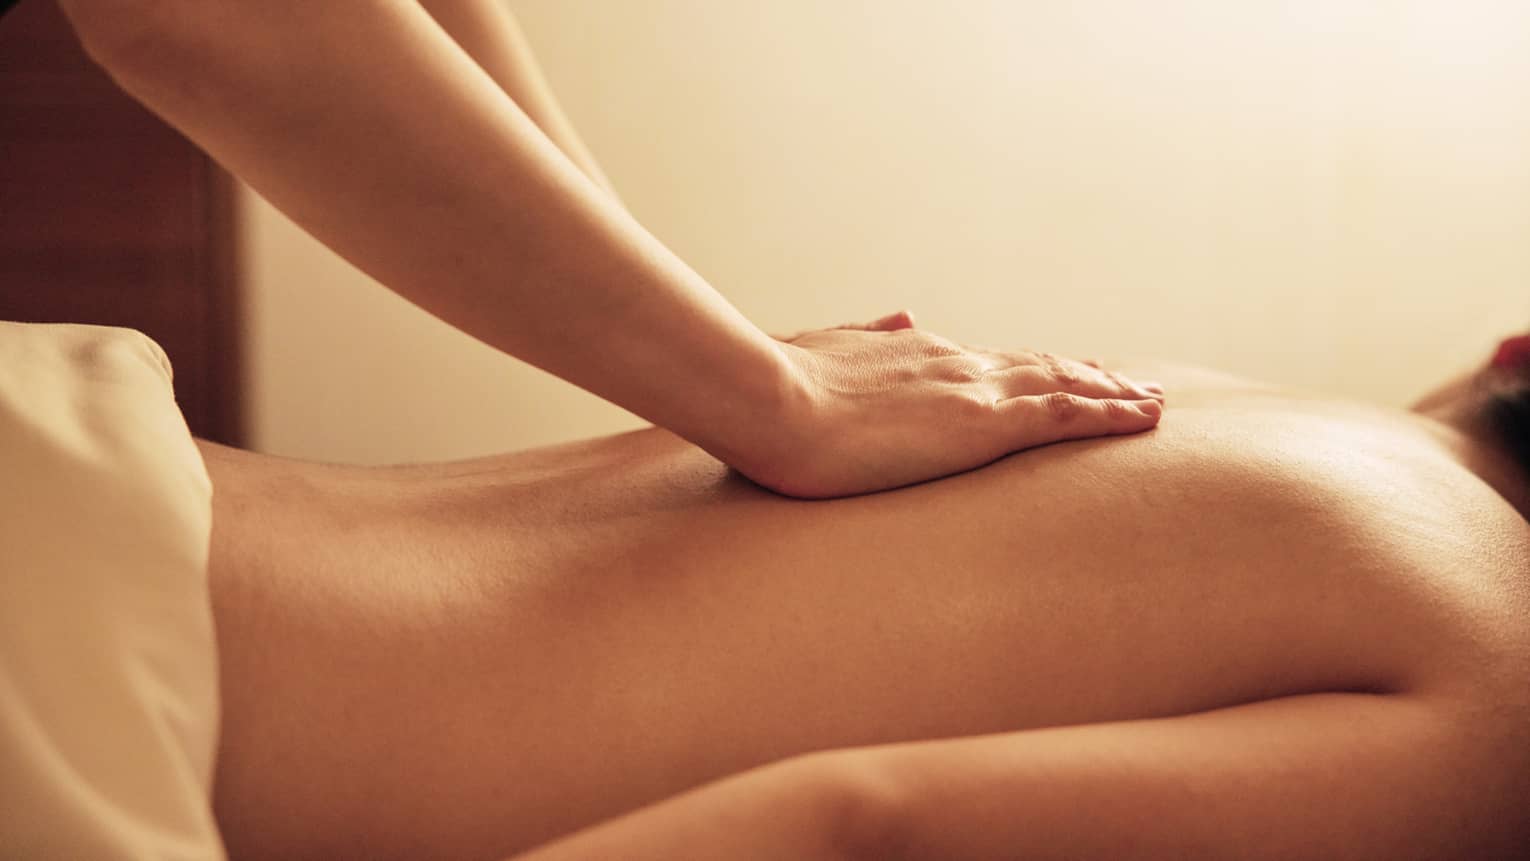 Masseuse rests hands on woman's bare back as she lays on massage table